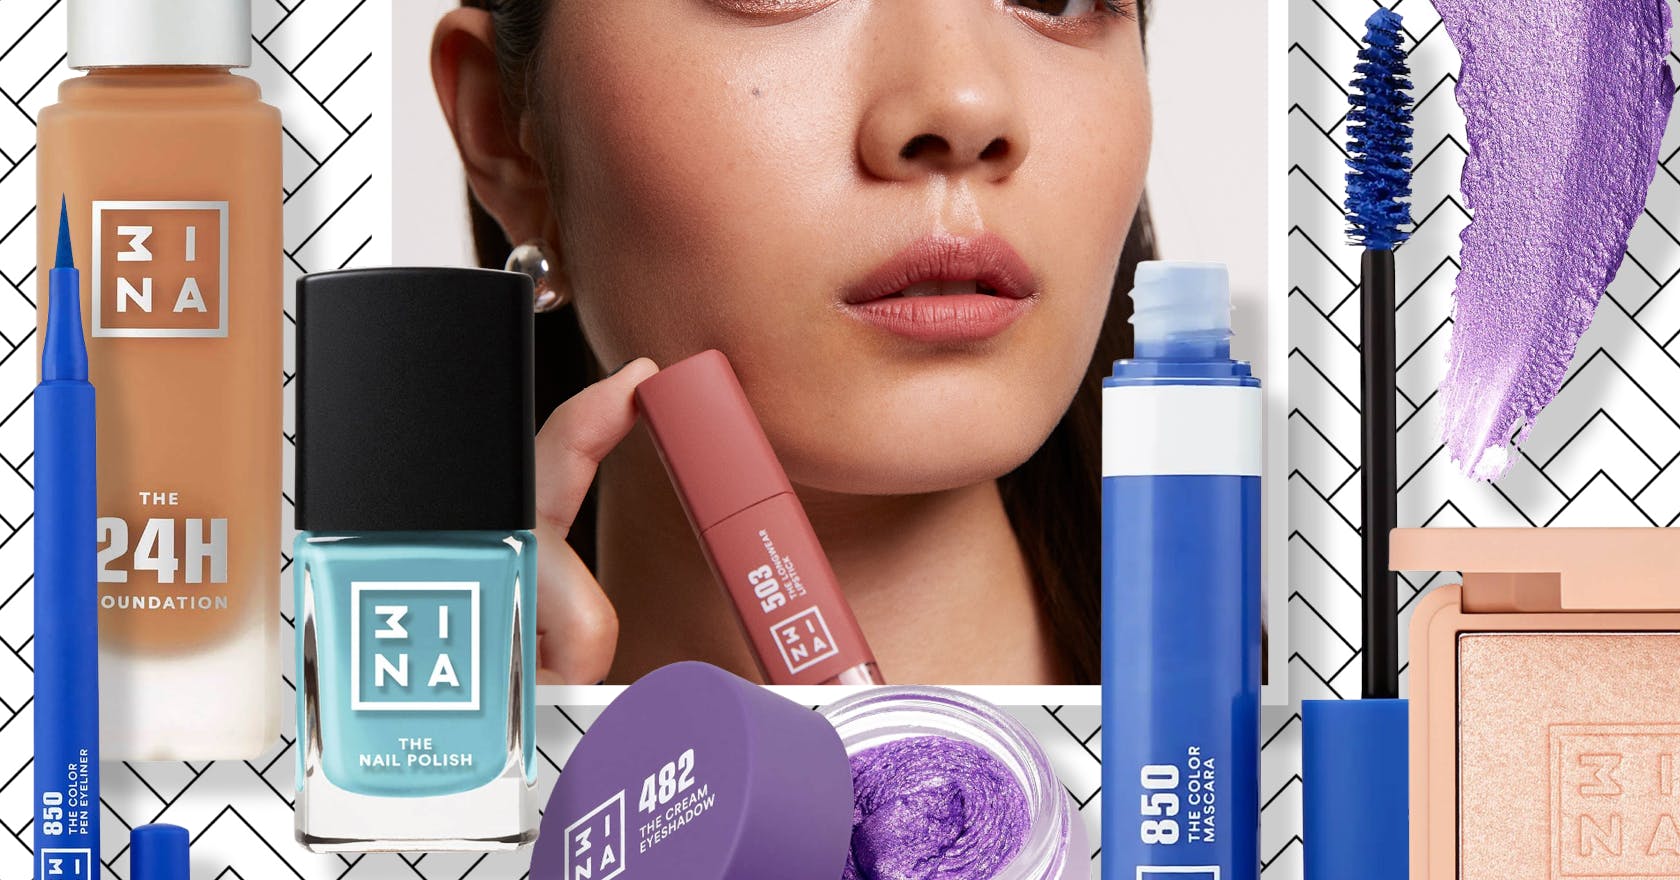 11 of the best makeup buys to try from the brand